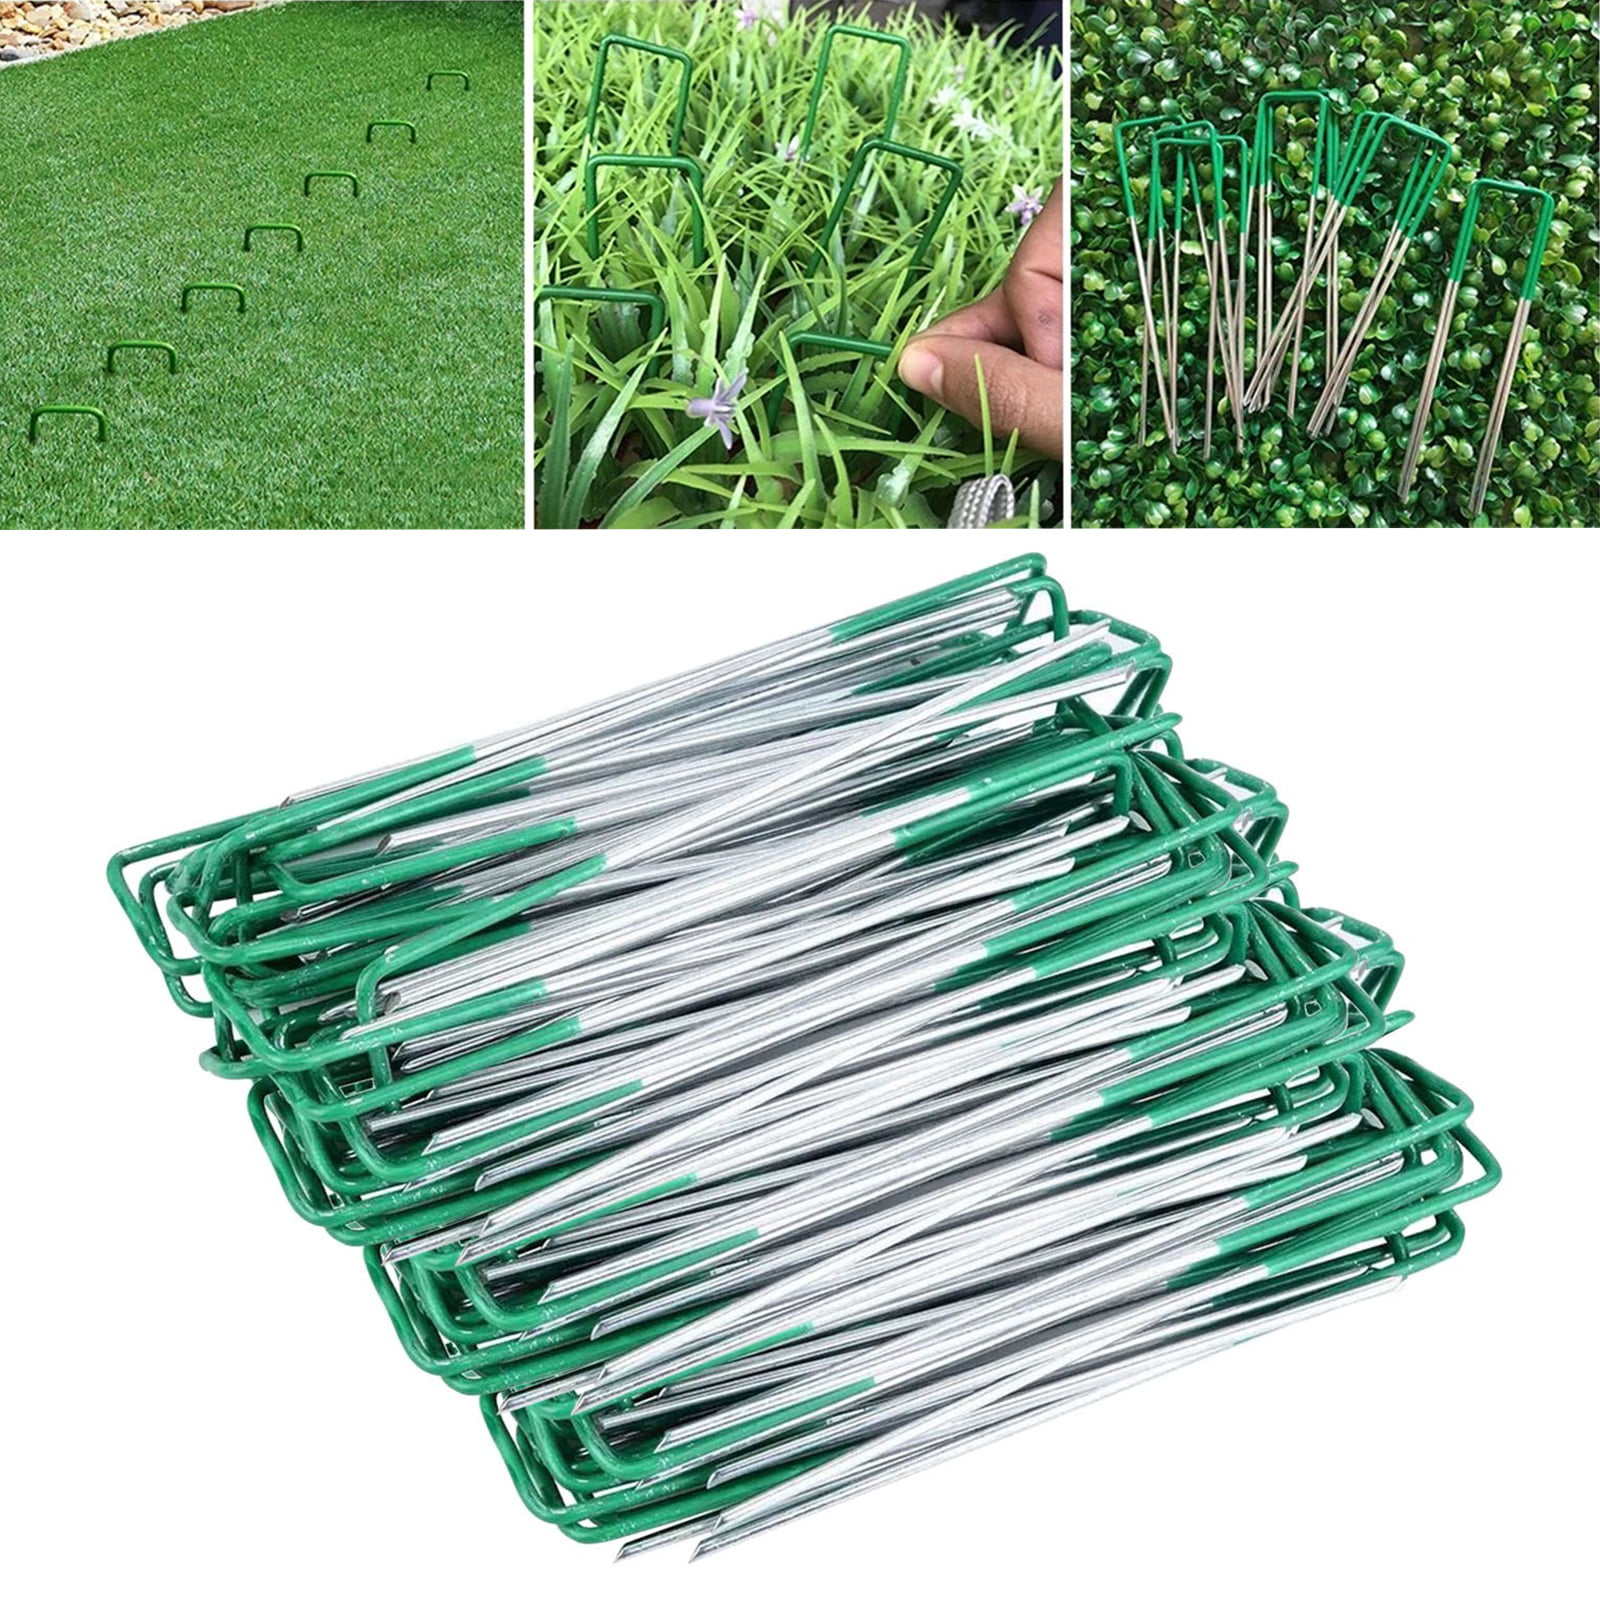 NAIL Artificial Grass Fixings Astro Turf Ground Peg Pins Staples